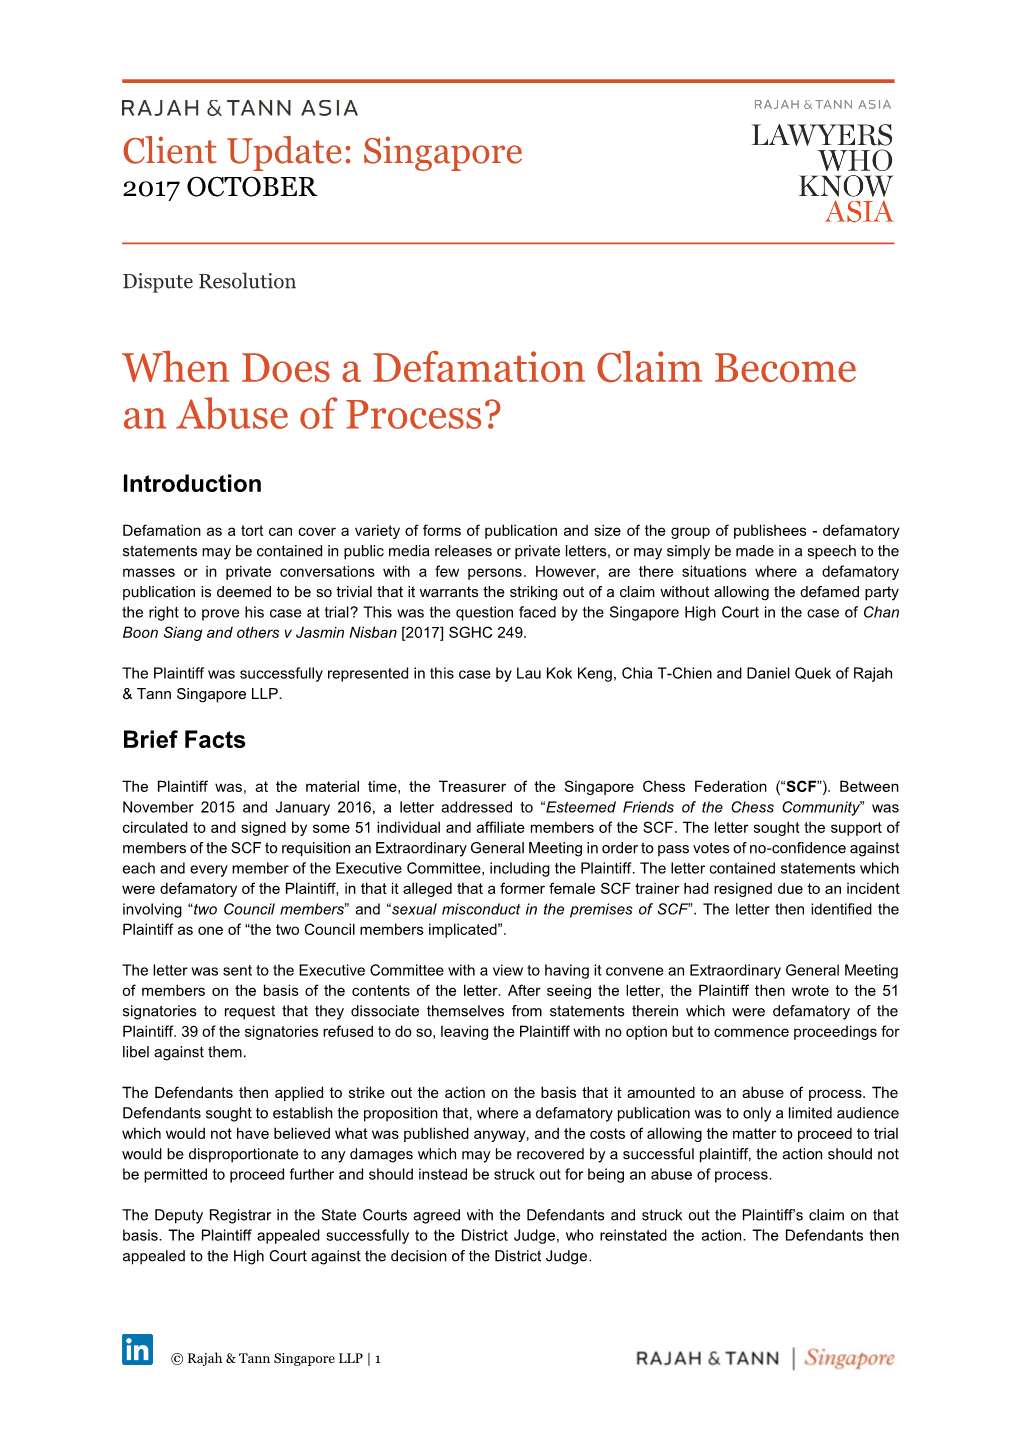 When Does a Defamation Claim Become an Abuse of Process?